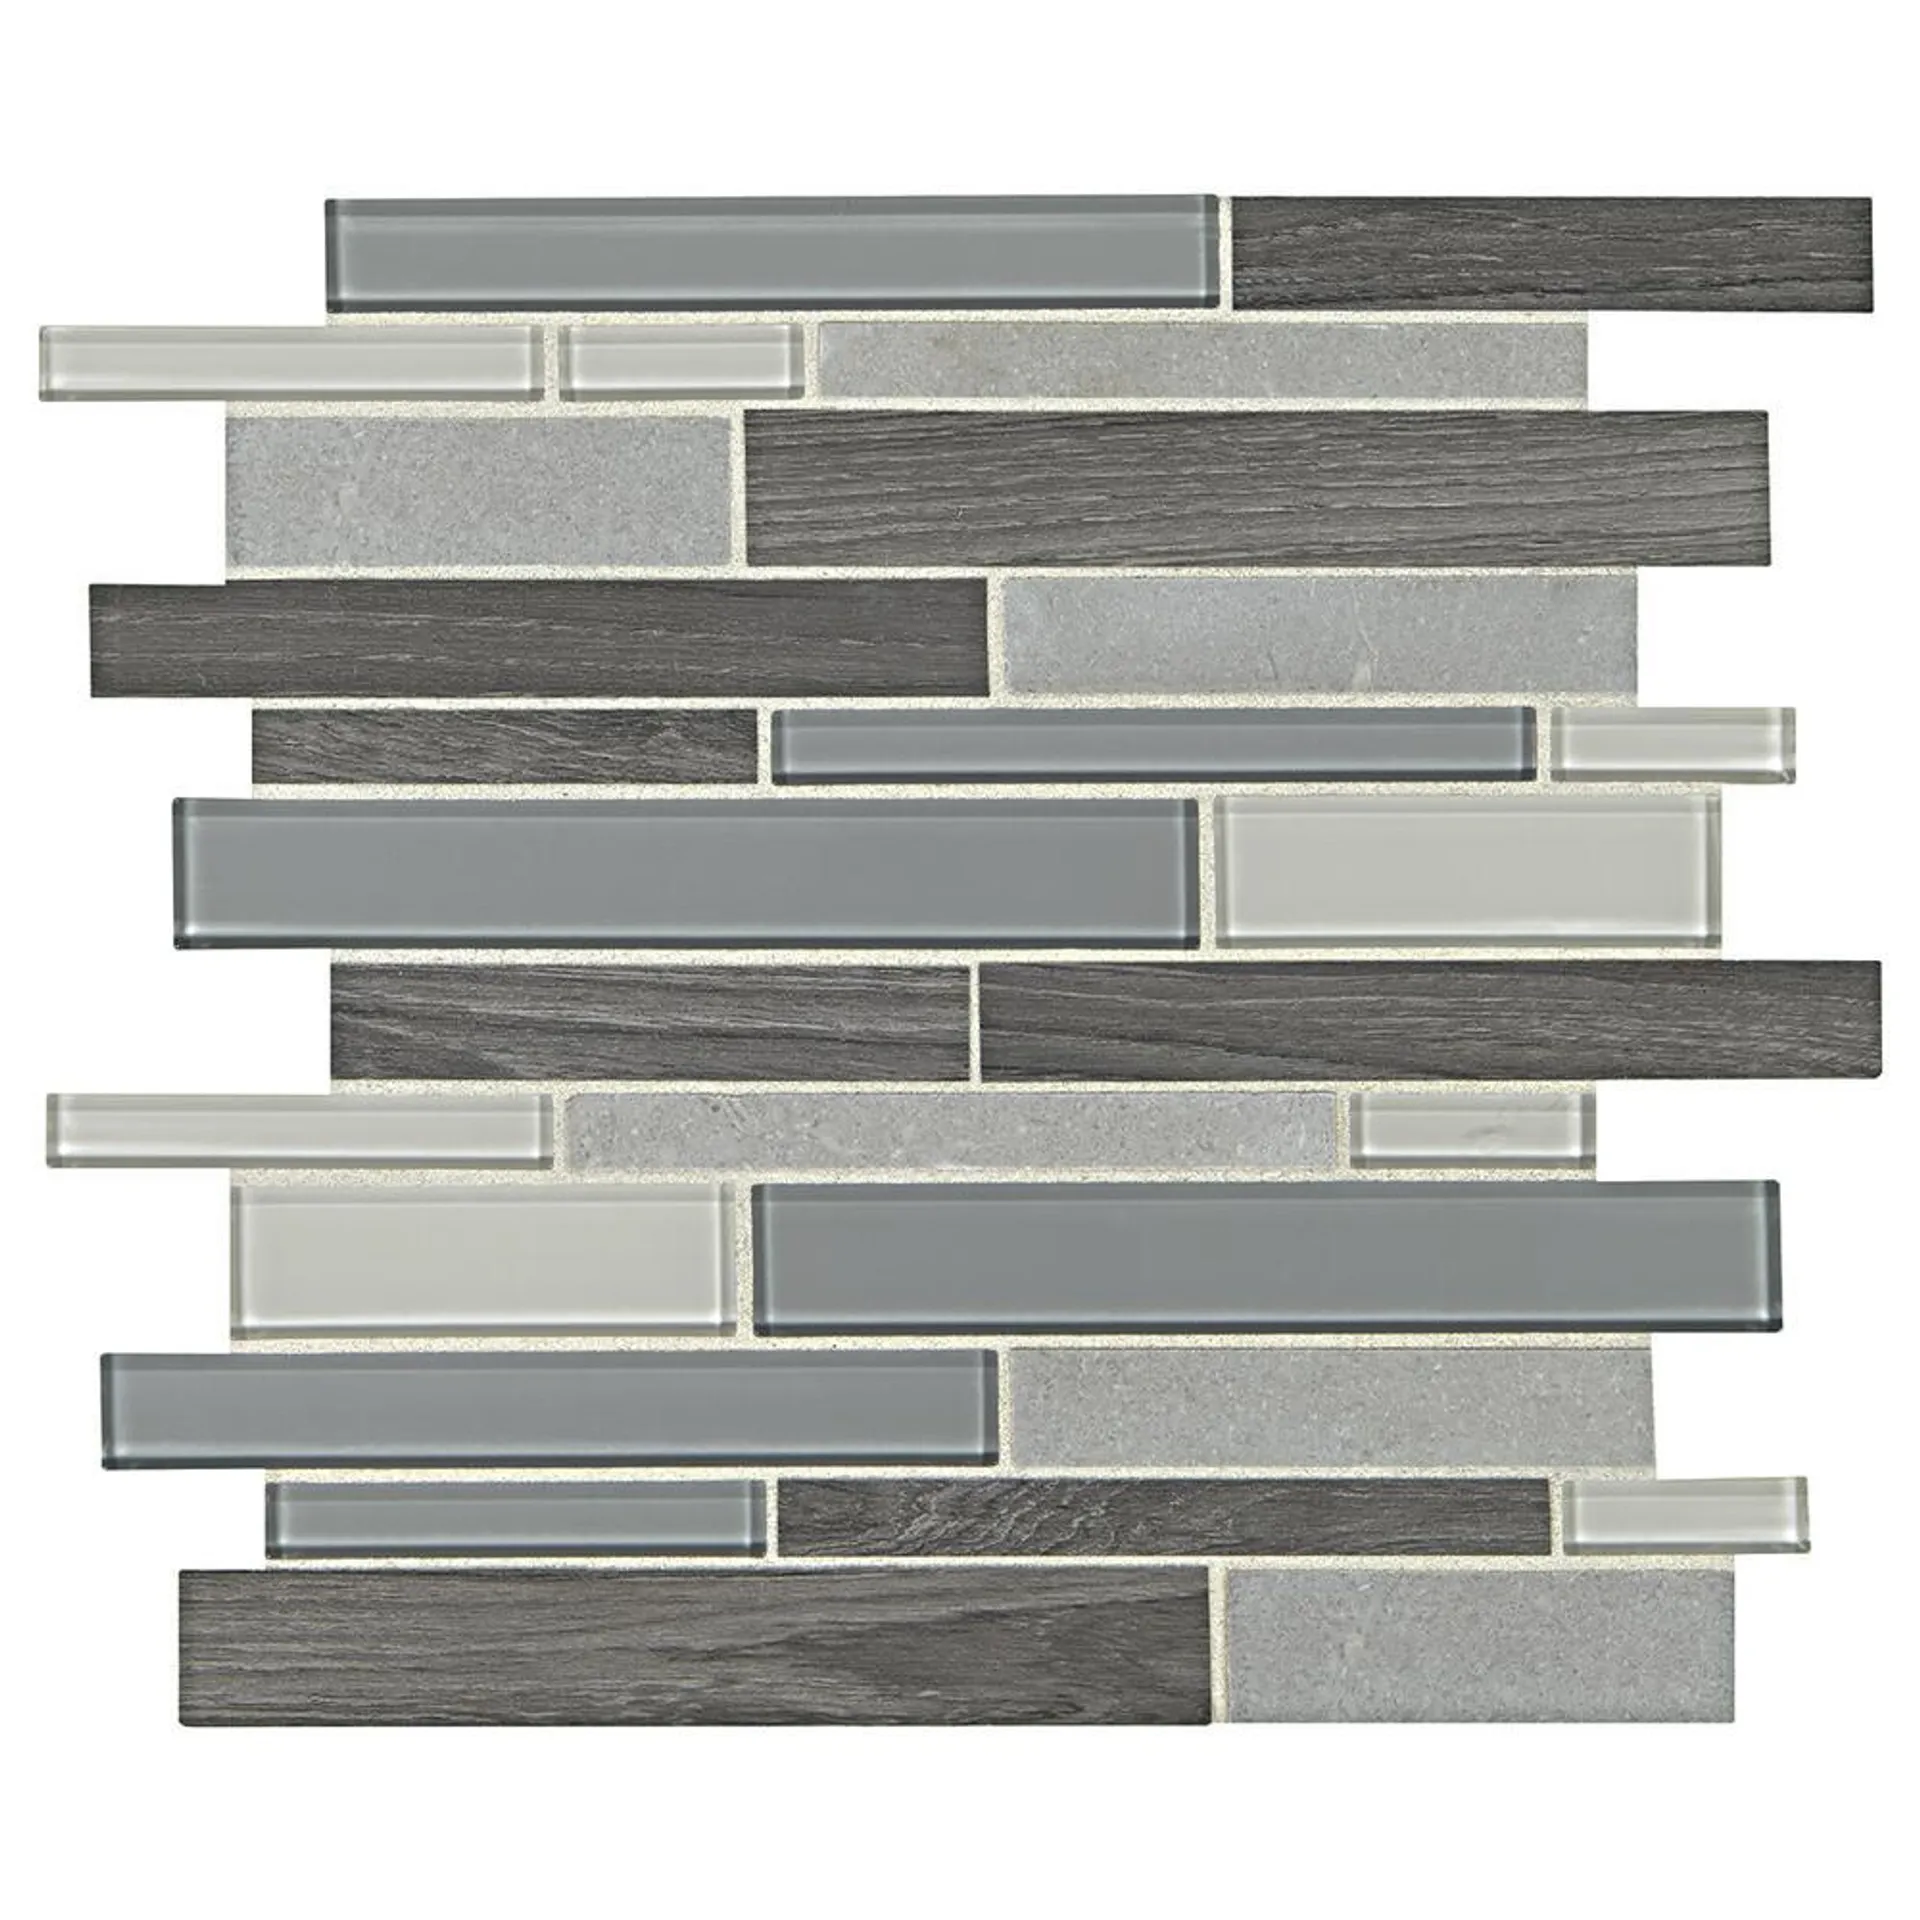 Mohawk® Inspired Earth Fog 11 x 14 Glass and Stone Mosaic Tile